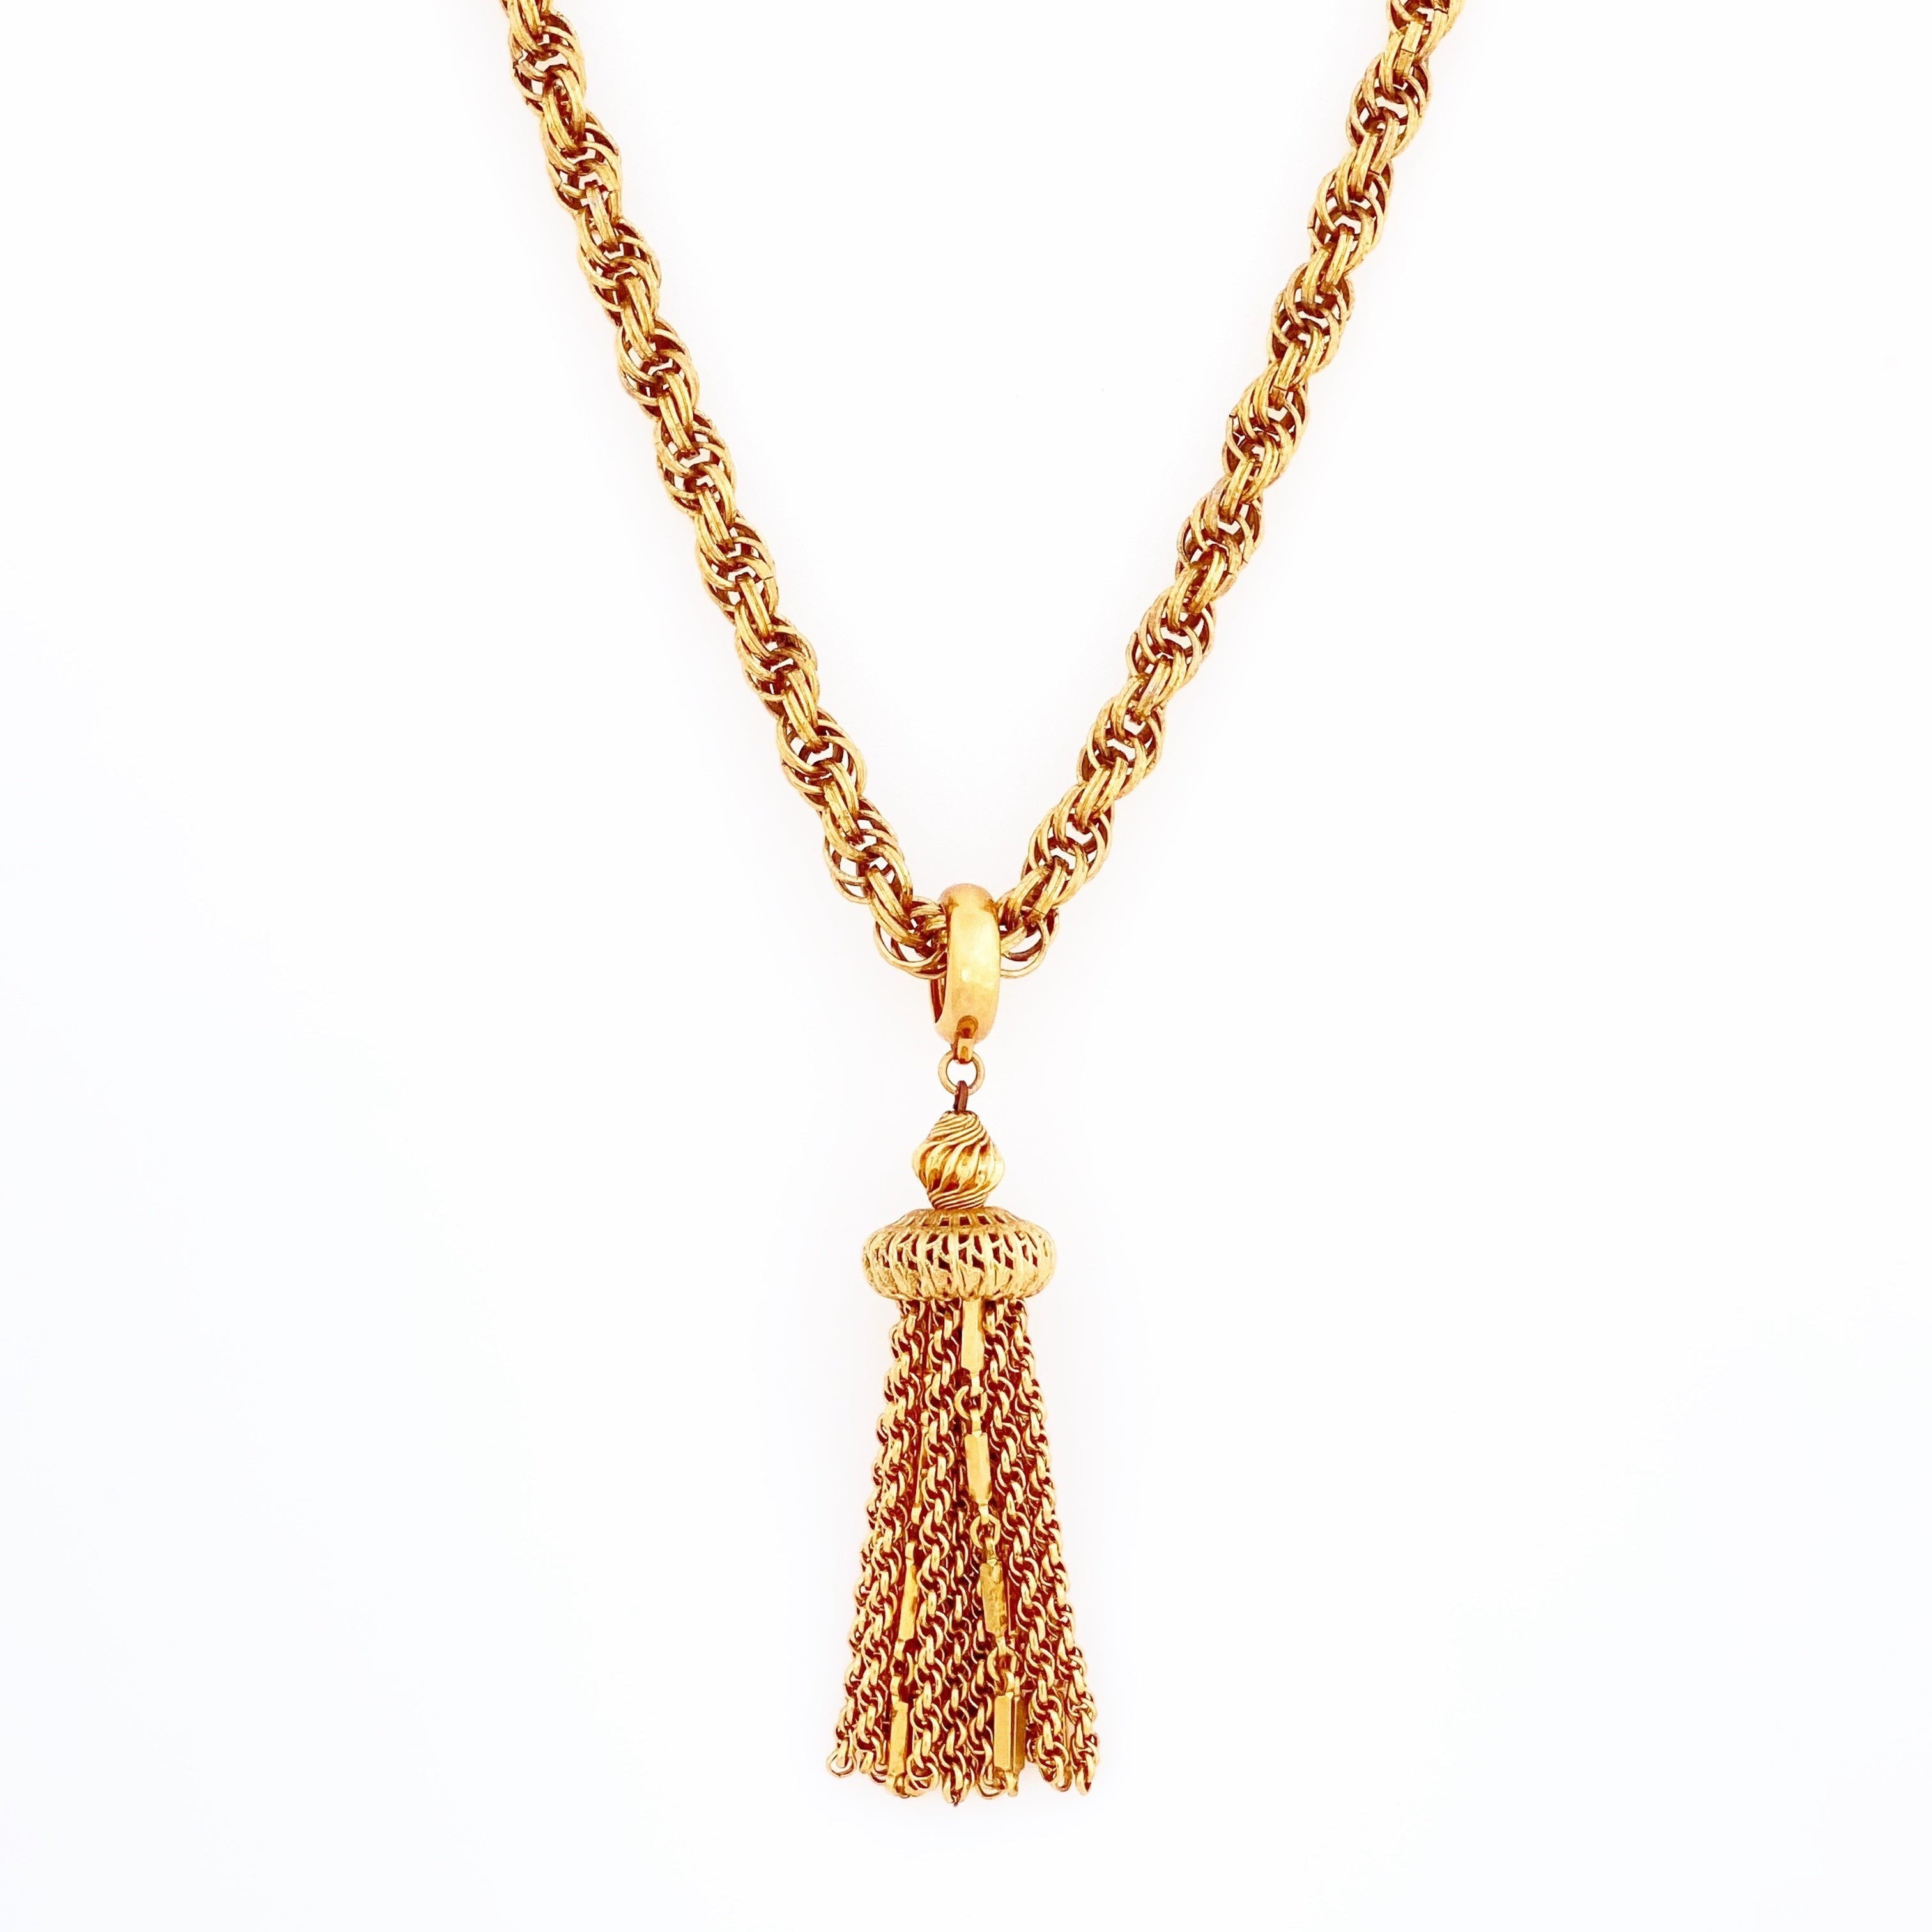 Buy Vintage Gold Tone Multi Chain Tassel Pendant on 24 Inch Chain Necklace  Designer Signed Monet Online in India - Etsy